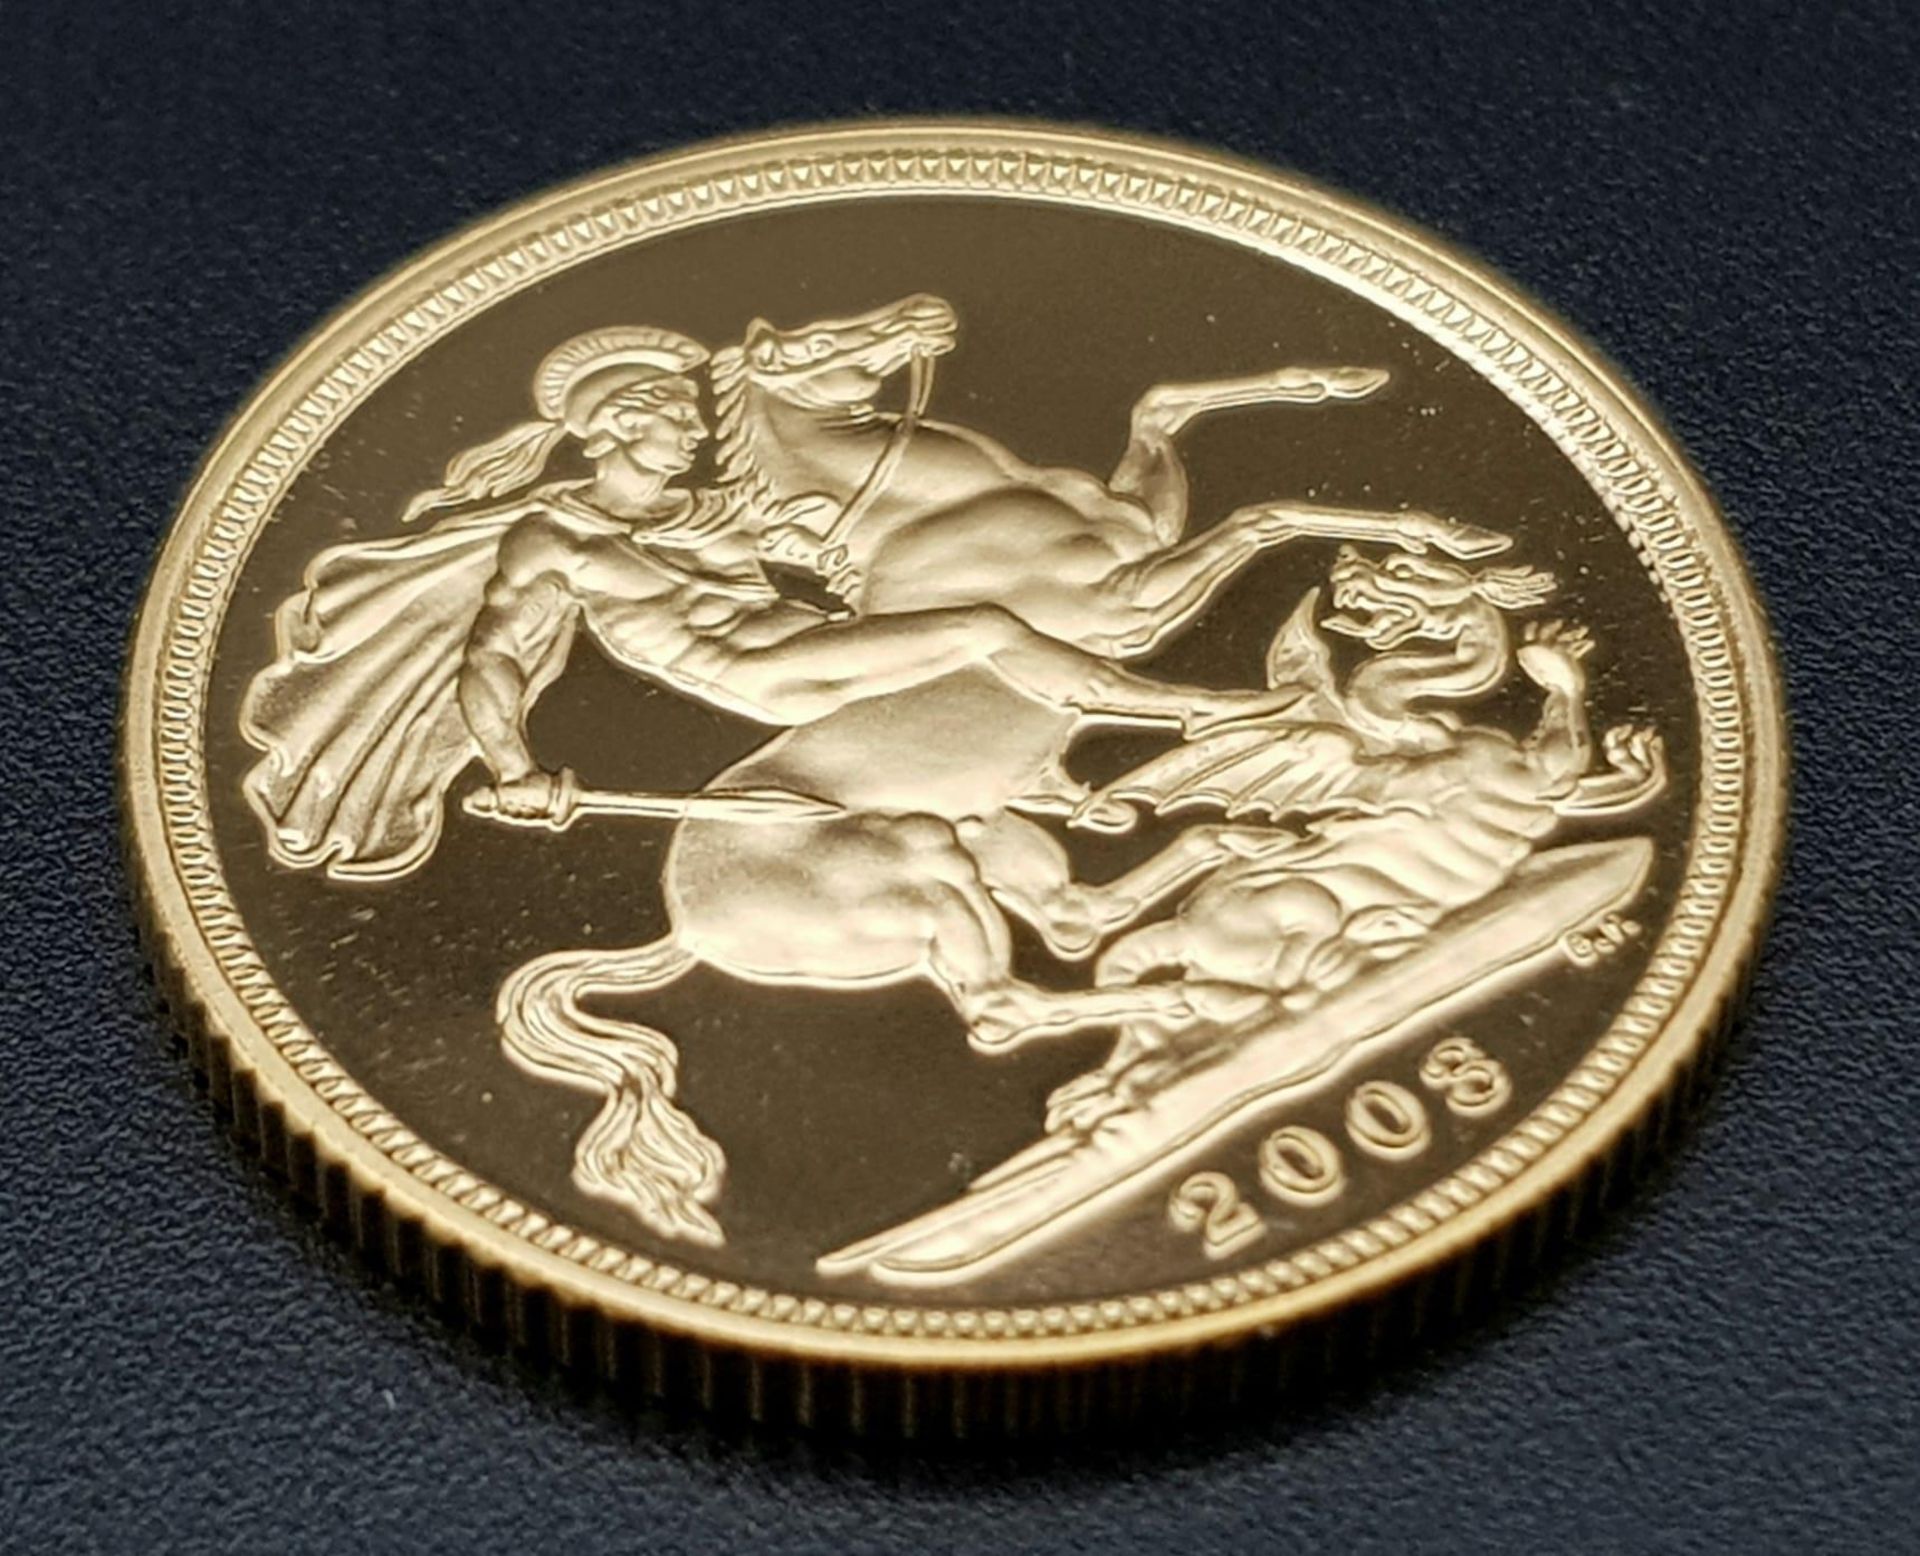 A Royal Mint Queen Elizabeth II 2003 Proof 22K Gold Full Sovereign. Classic George and Dragon